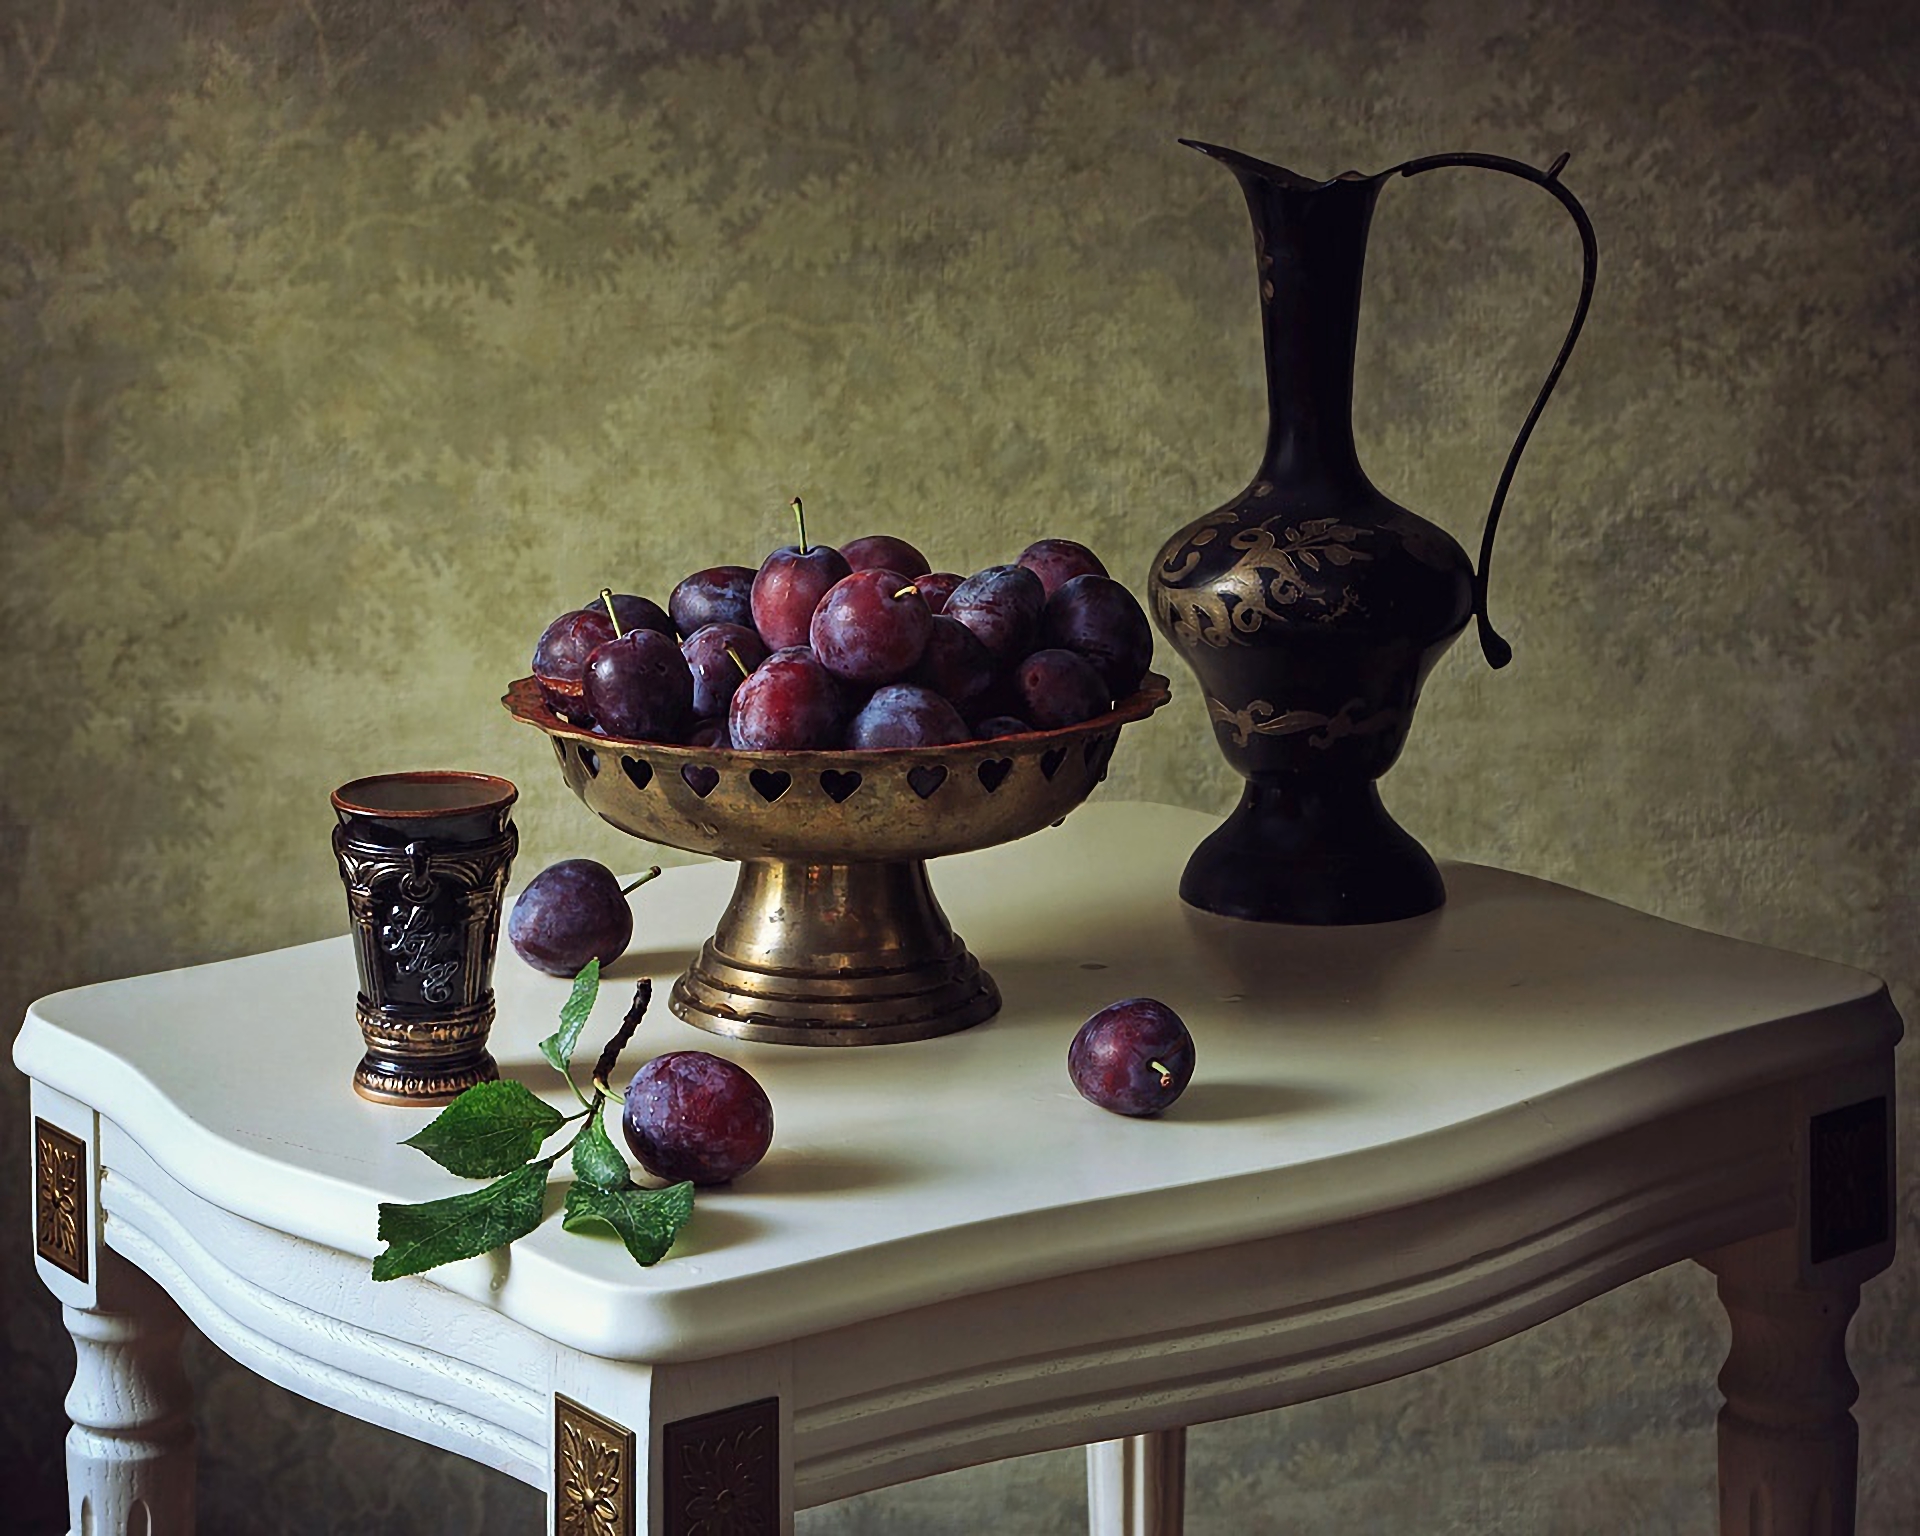 photography, still life, bowl, cup, pitcher, plum, table